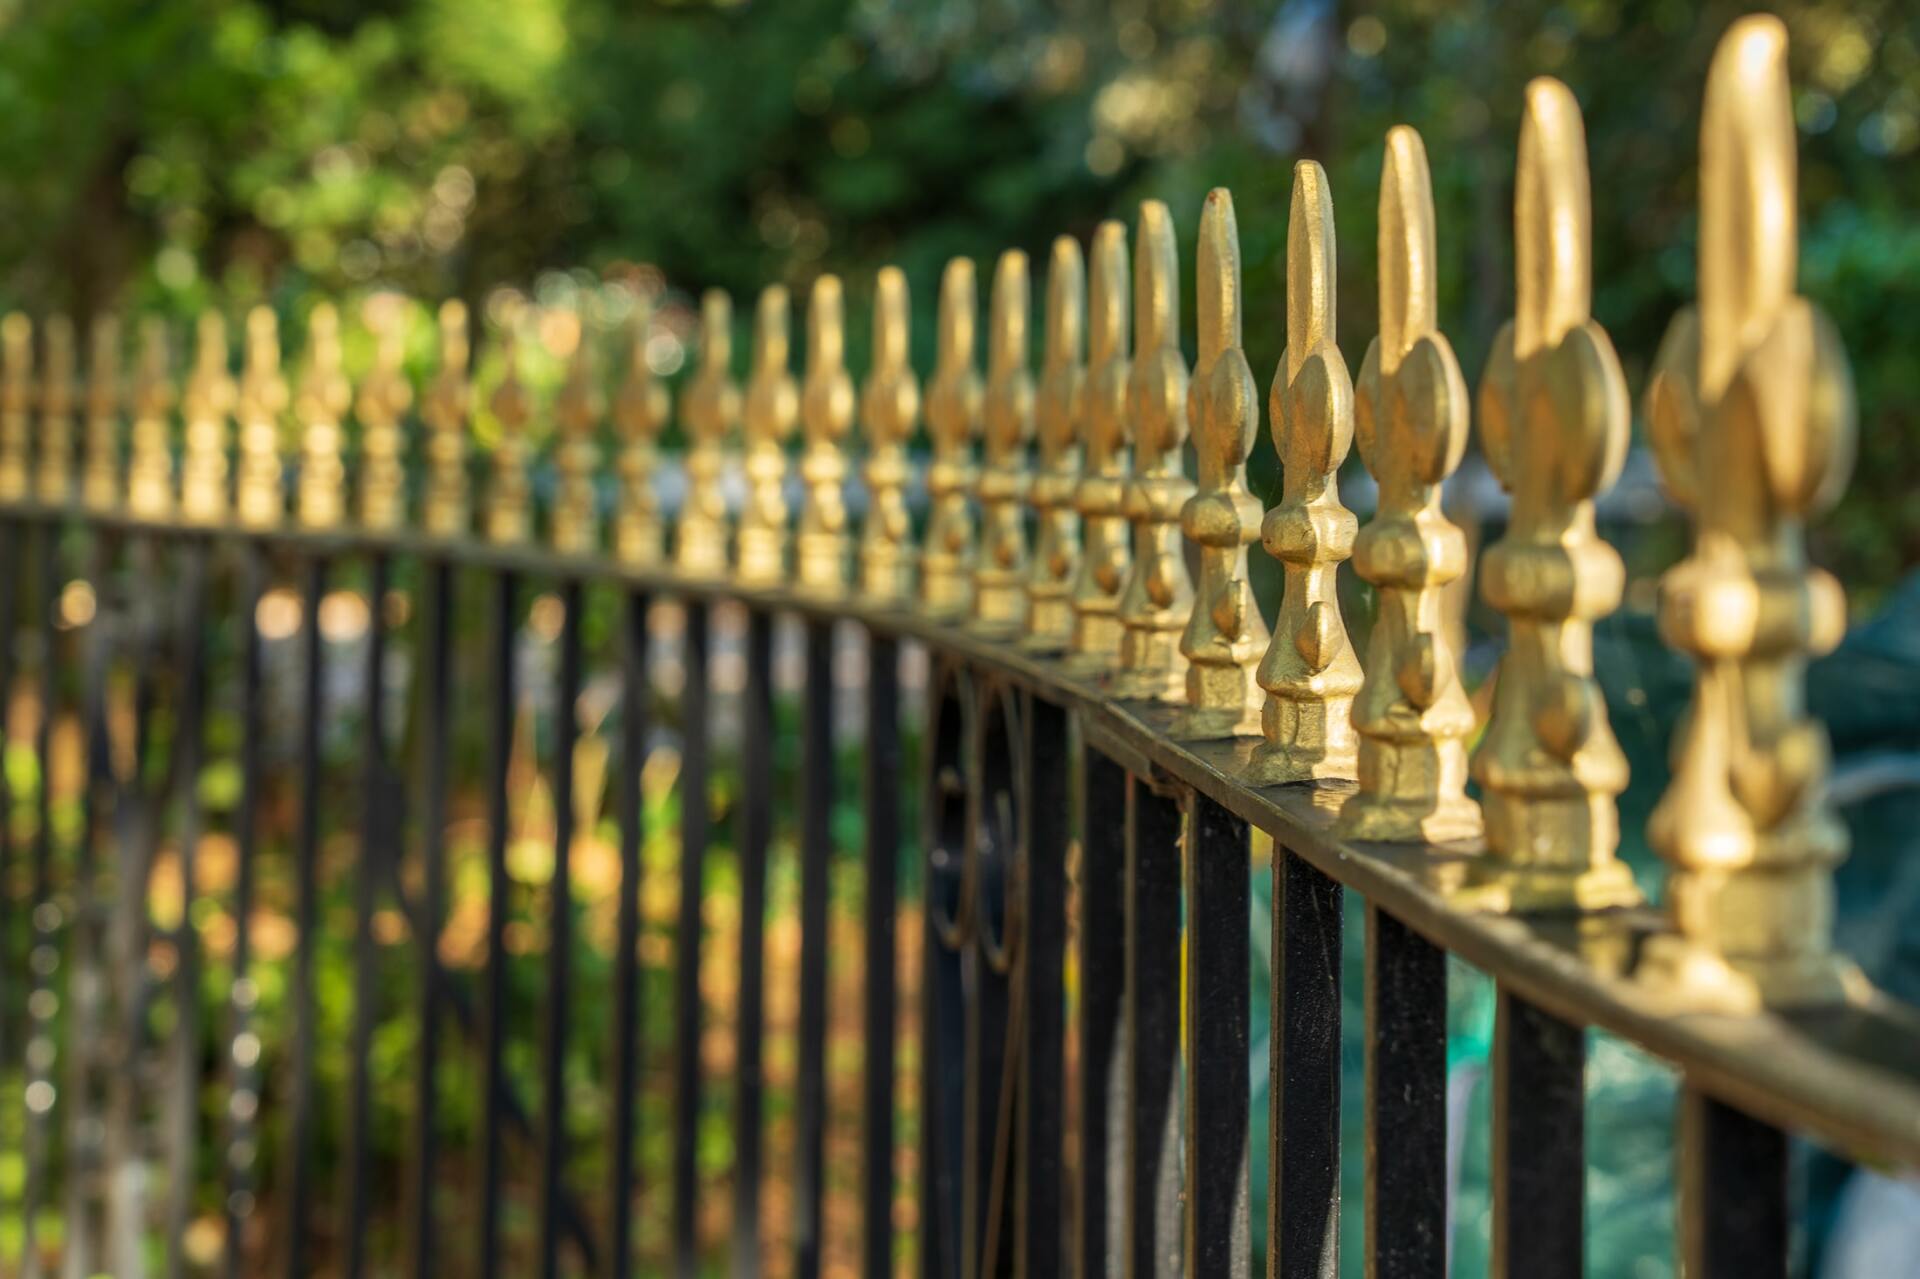 ornamental corrugated iron fences with gold speartips